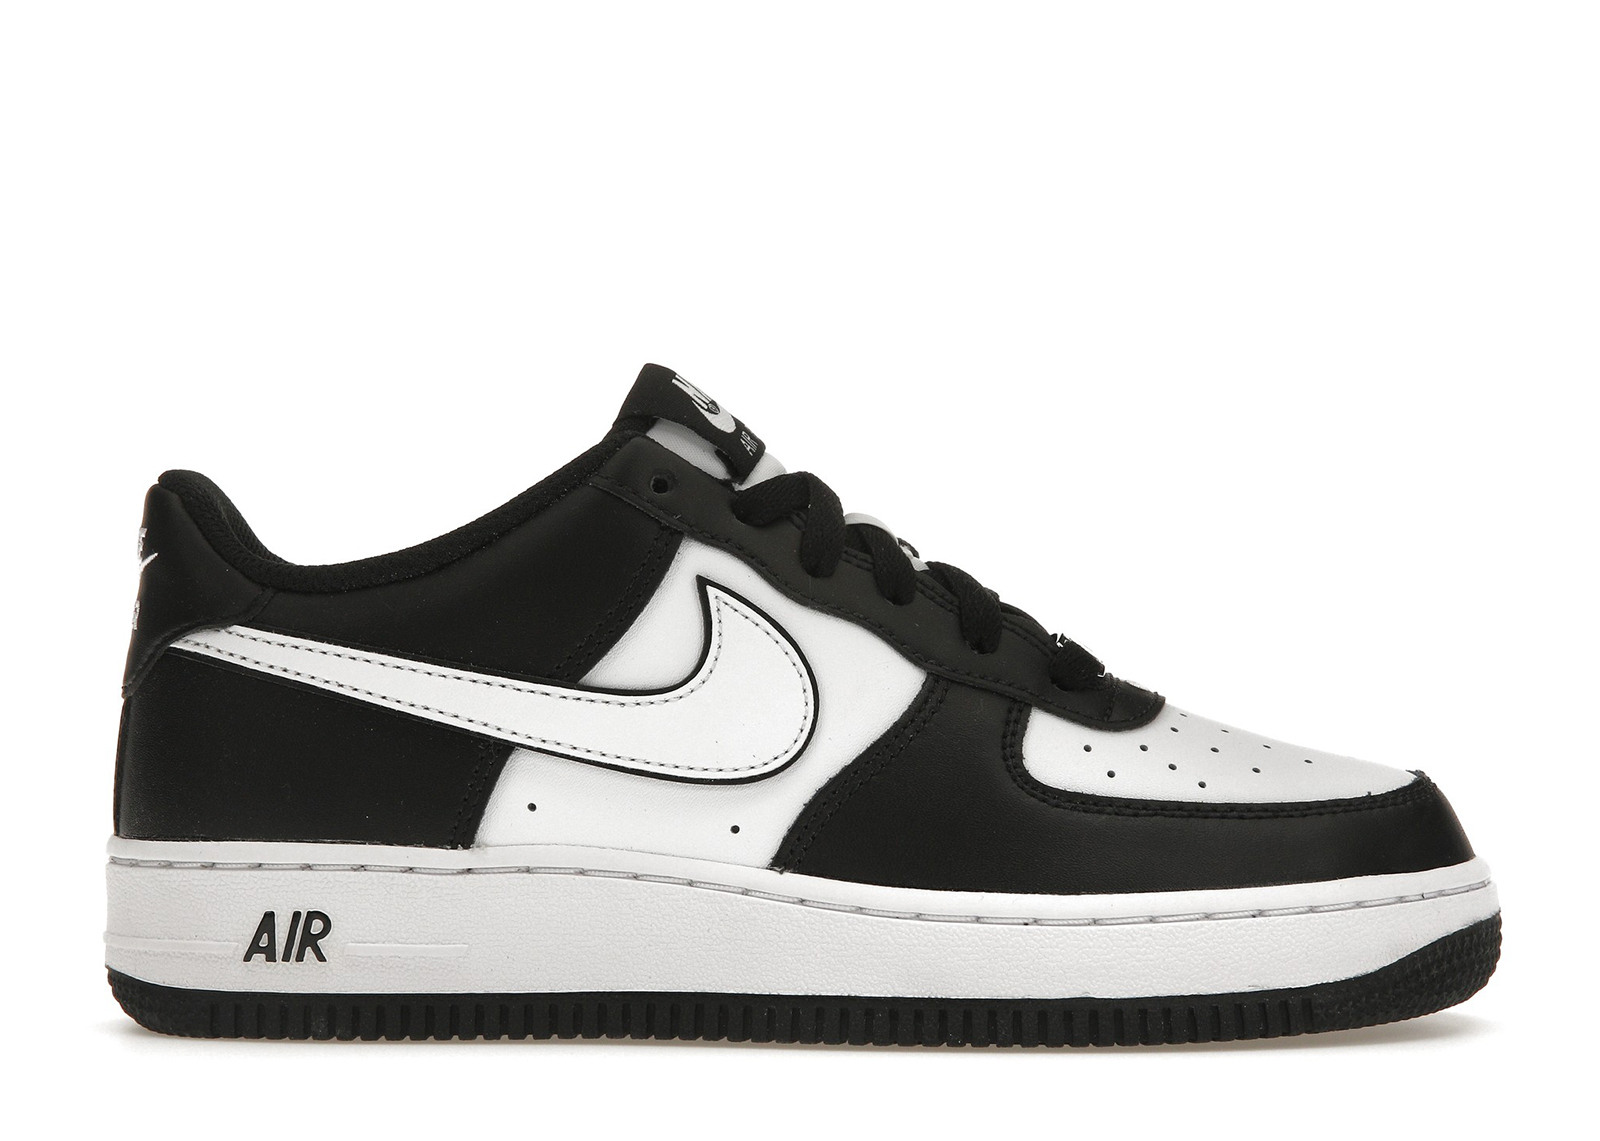 Nike Air Force 1 Low '07 LV8 2 ホワイト ブラックメンズ